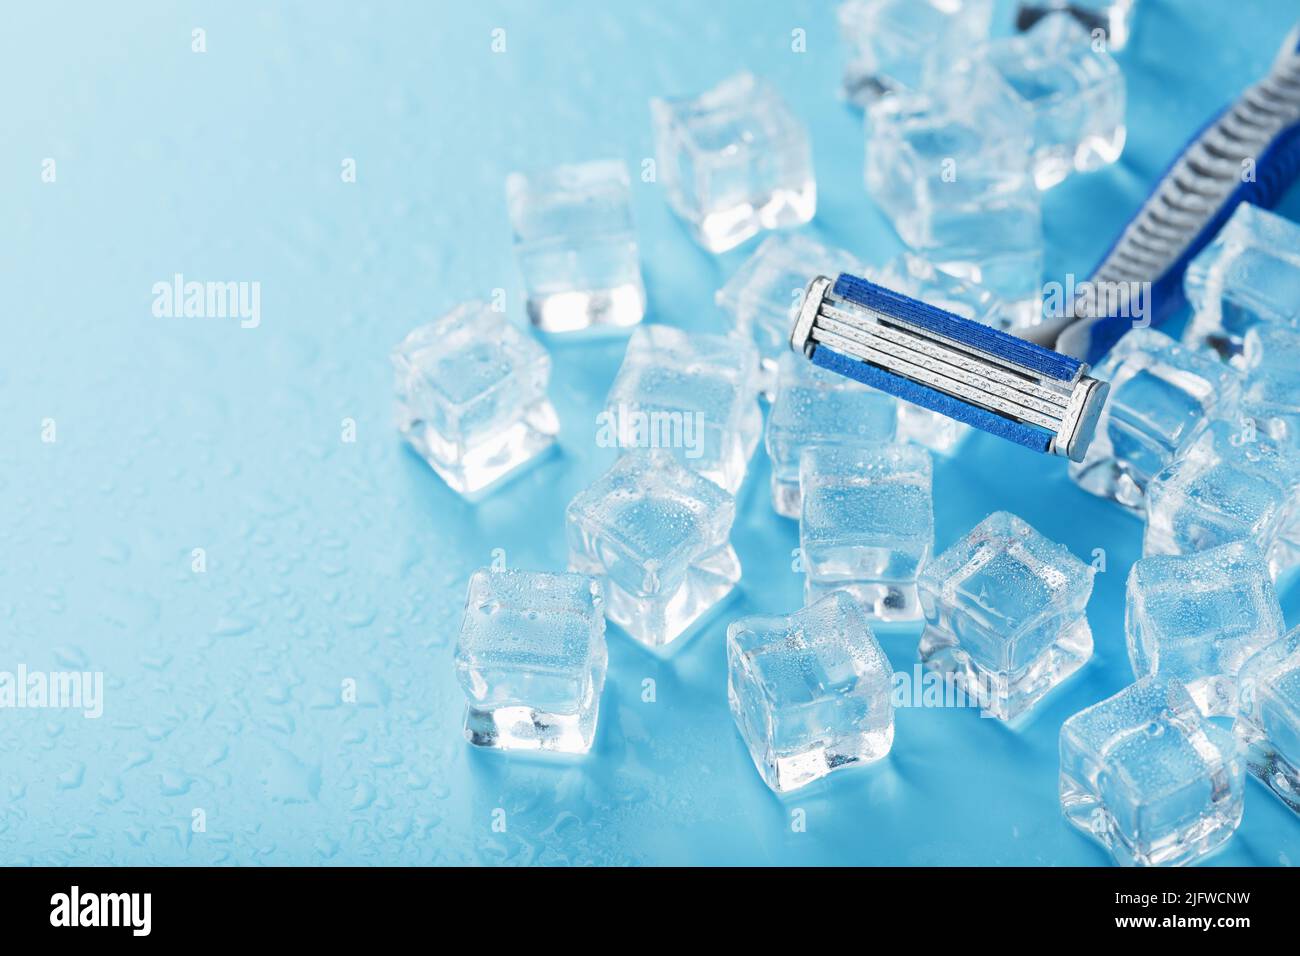 Shaving machine on a blue background with ice cubes. The concept of cleanliness and frosty freshness Stock Photo